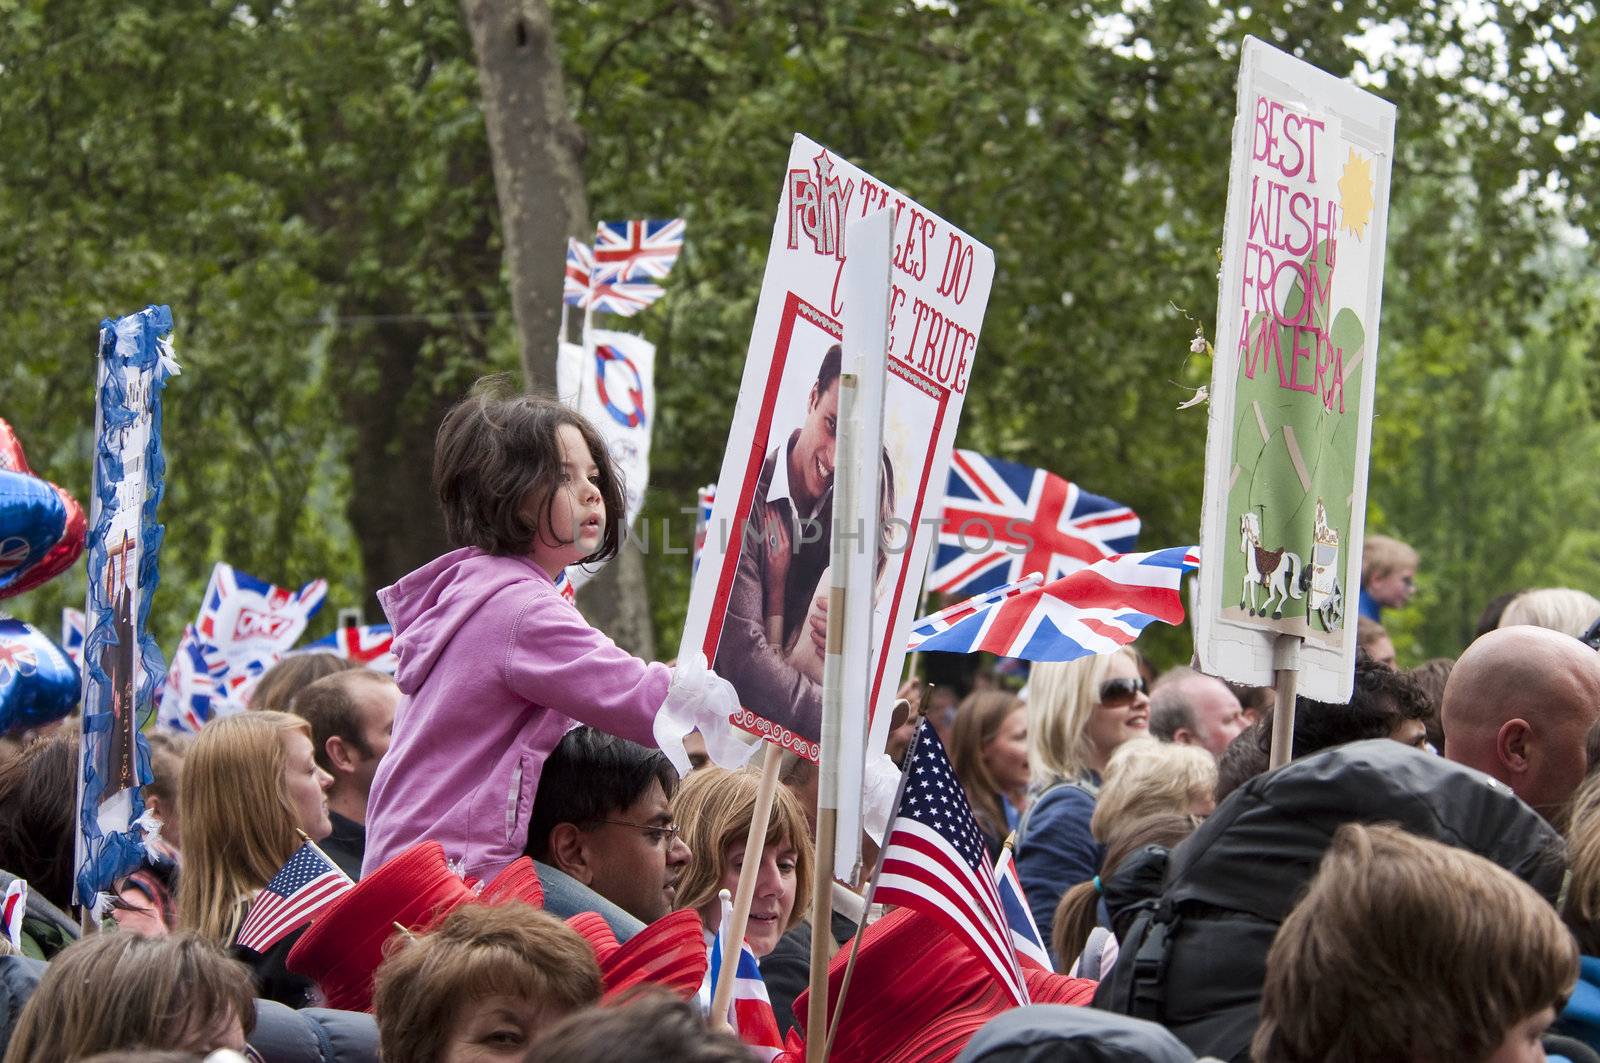 The royal wedding of Prince William and Kate Middleton, London, Friday April 29th, 2011